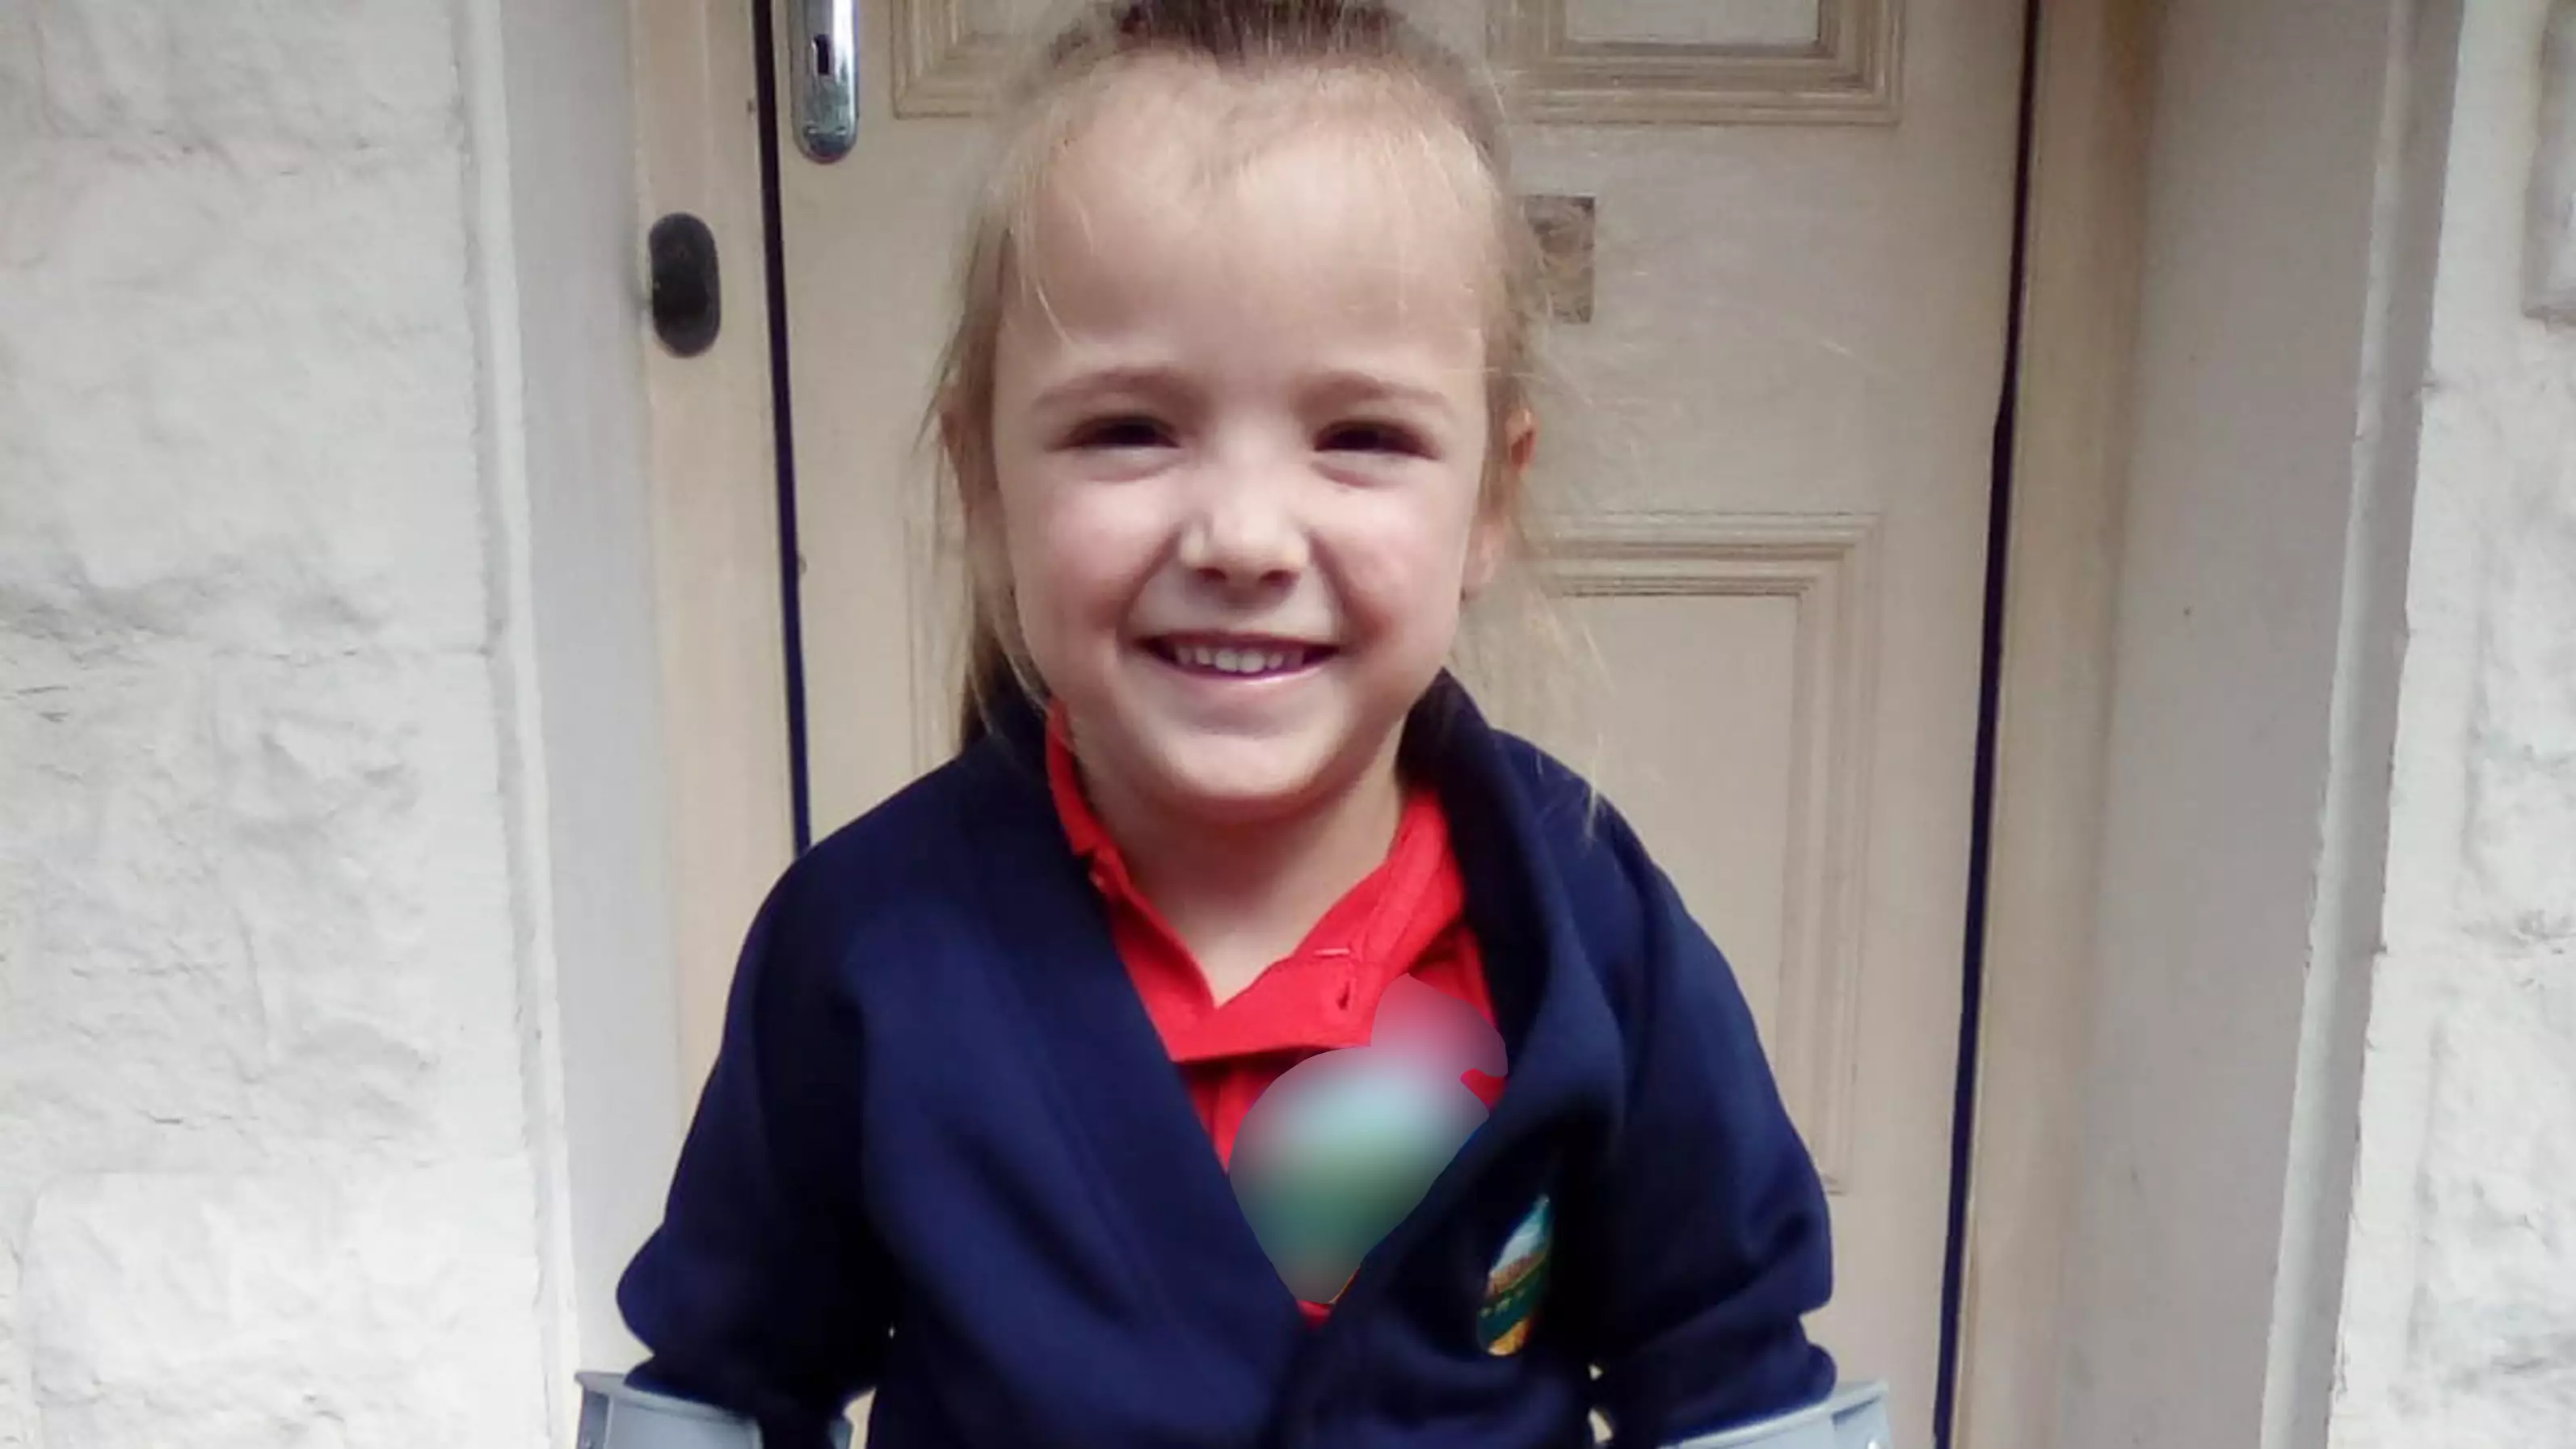 Girl With Cerebral Palsy Takes First Unaided Steps On Her First Day Of School